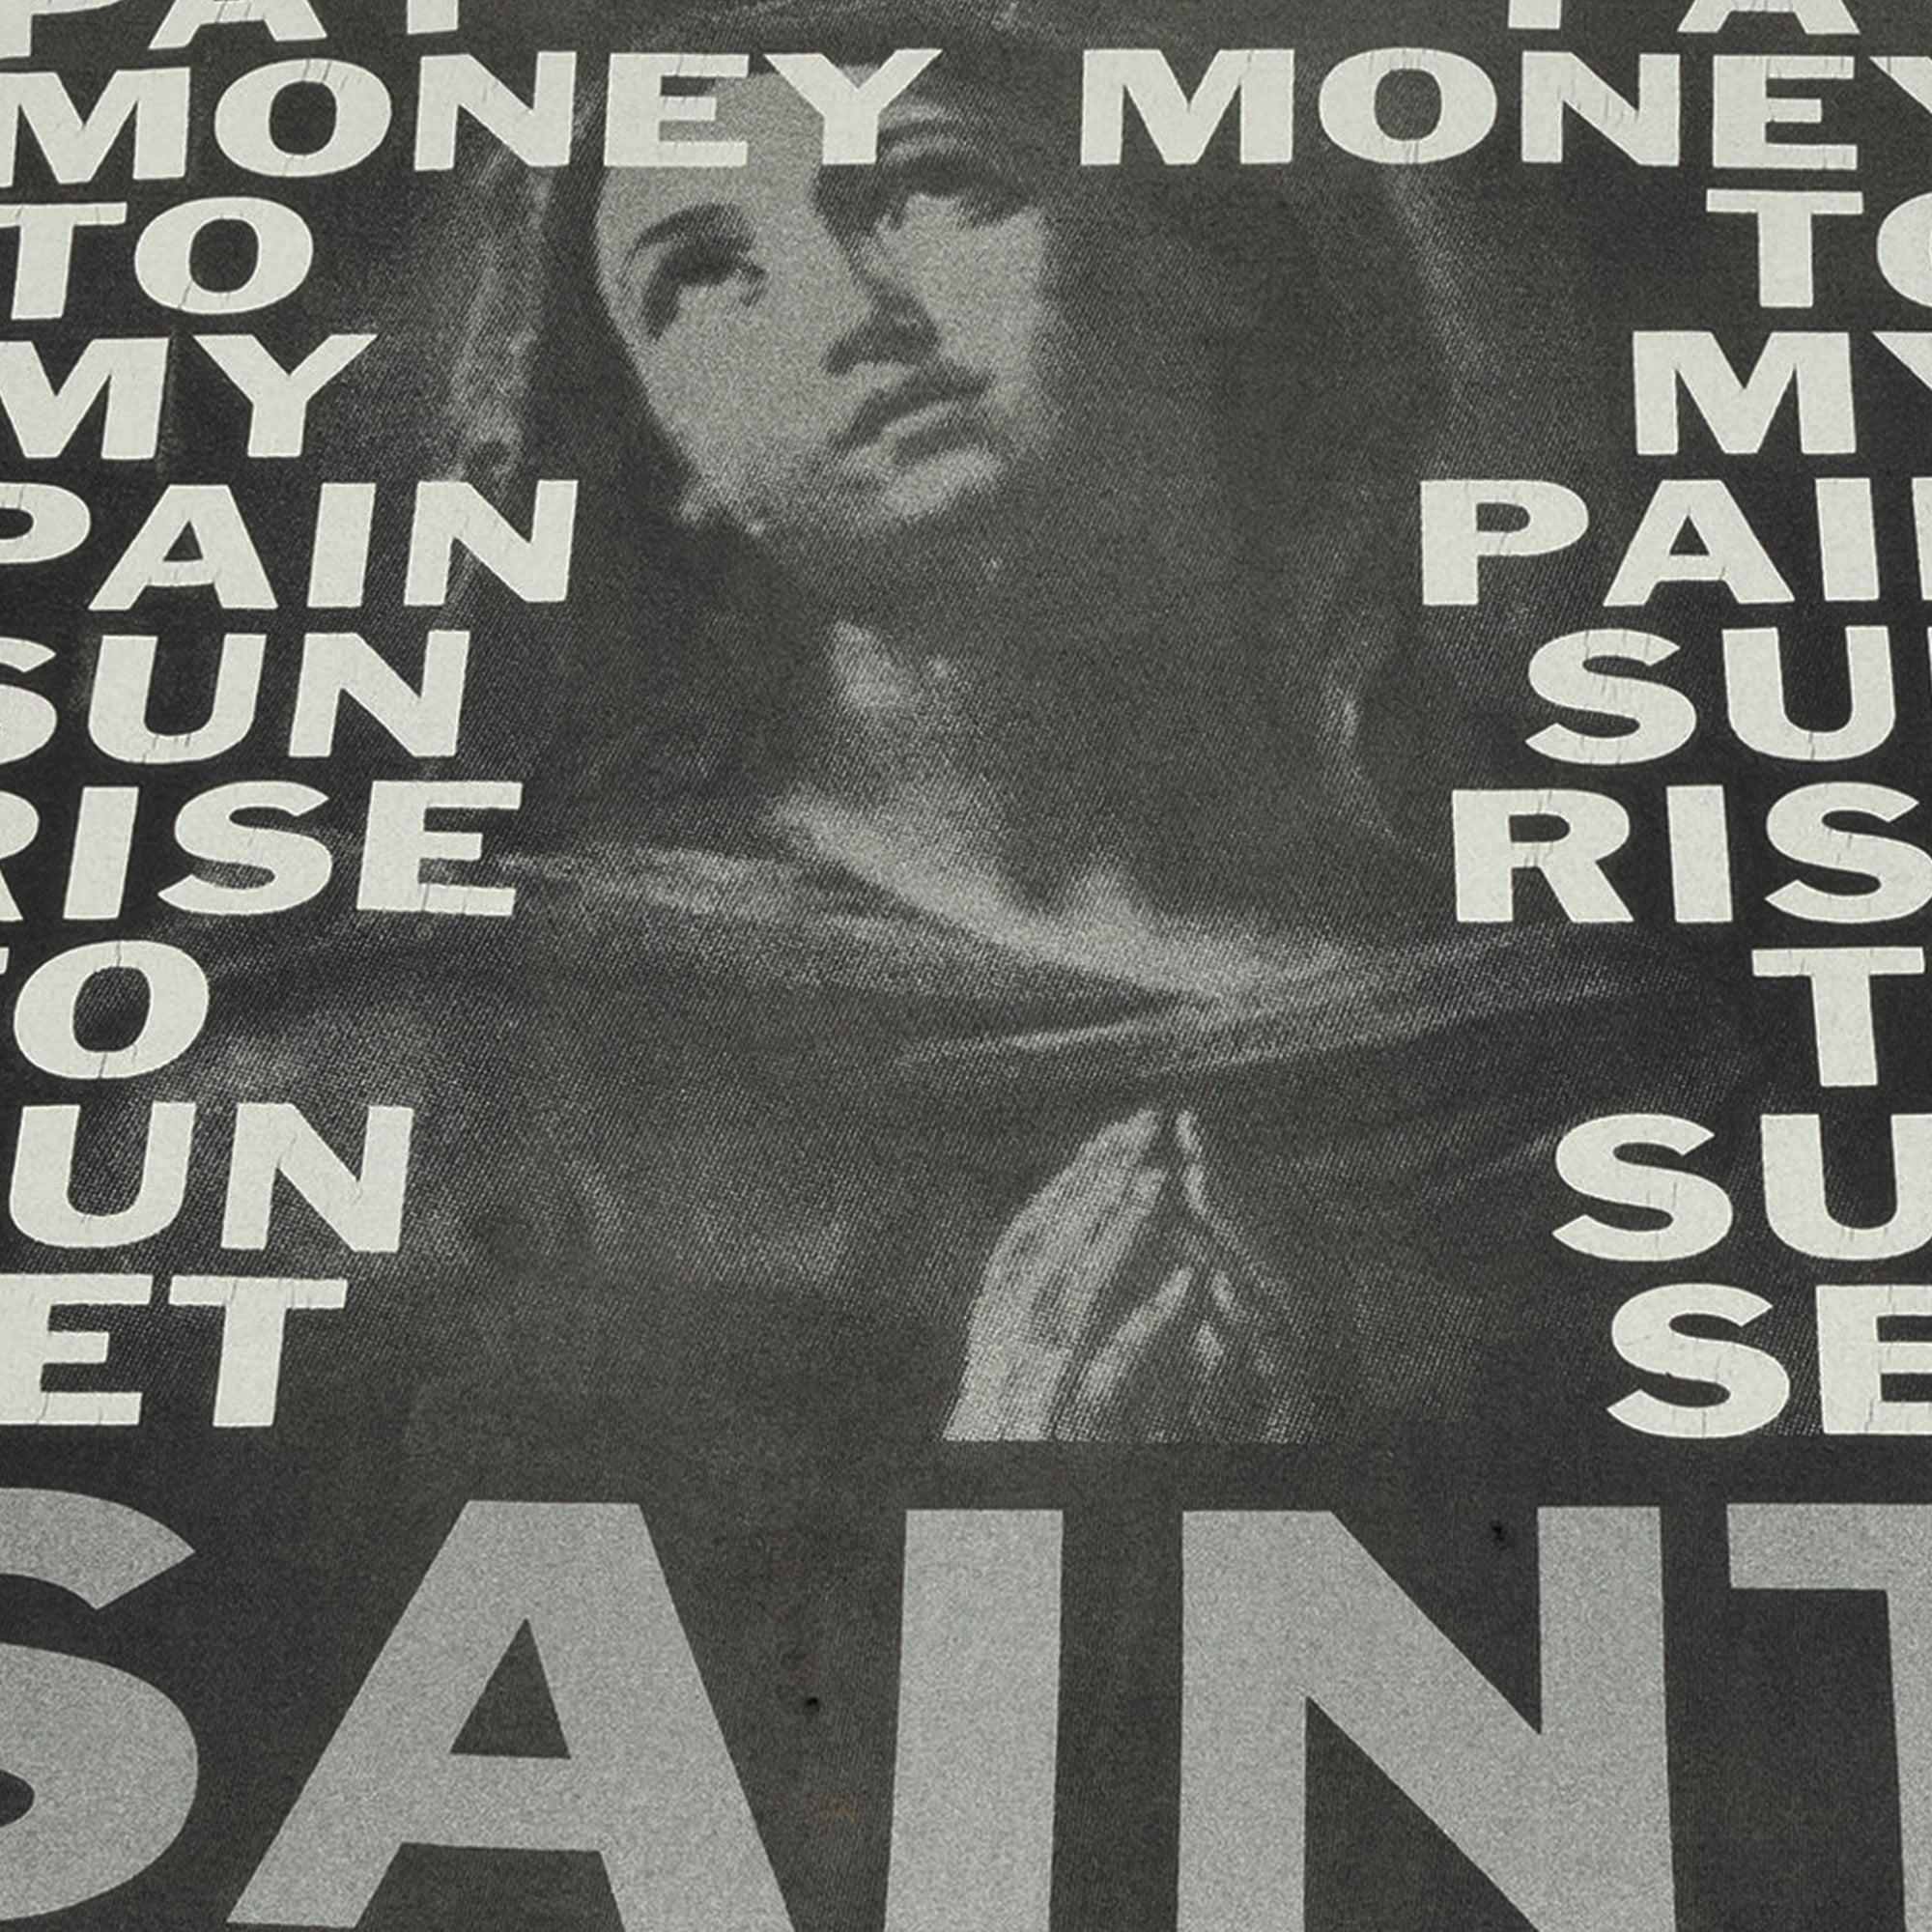 PAY MONEY TO MY PAIN S/S T-SHIRTS